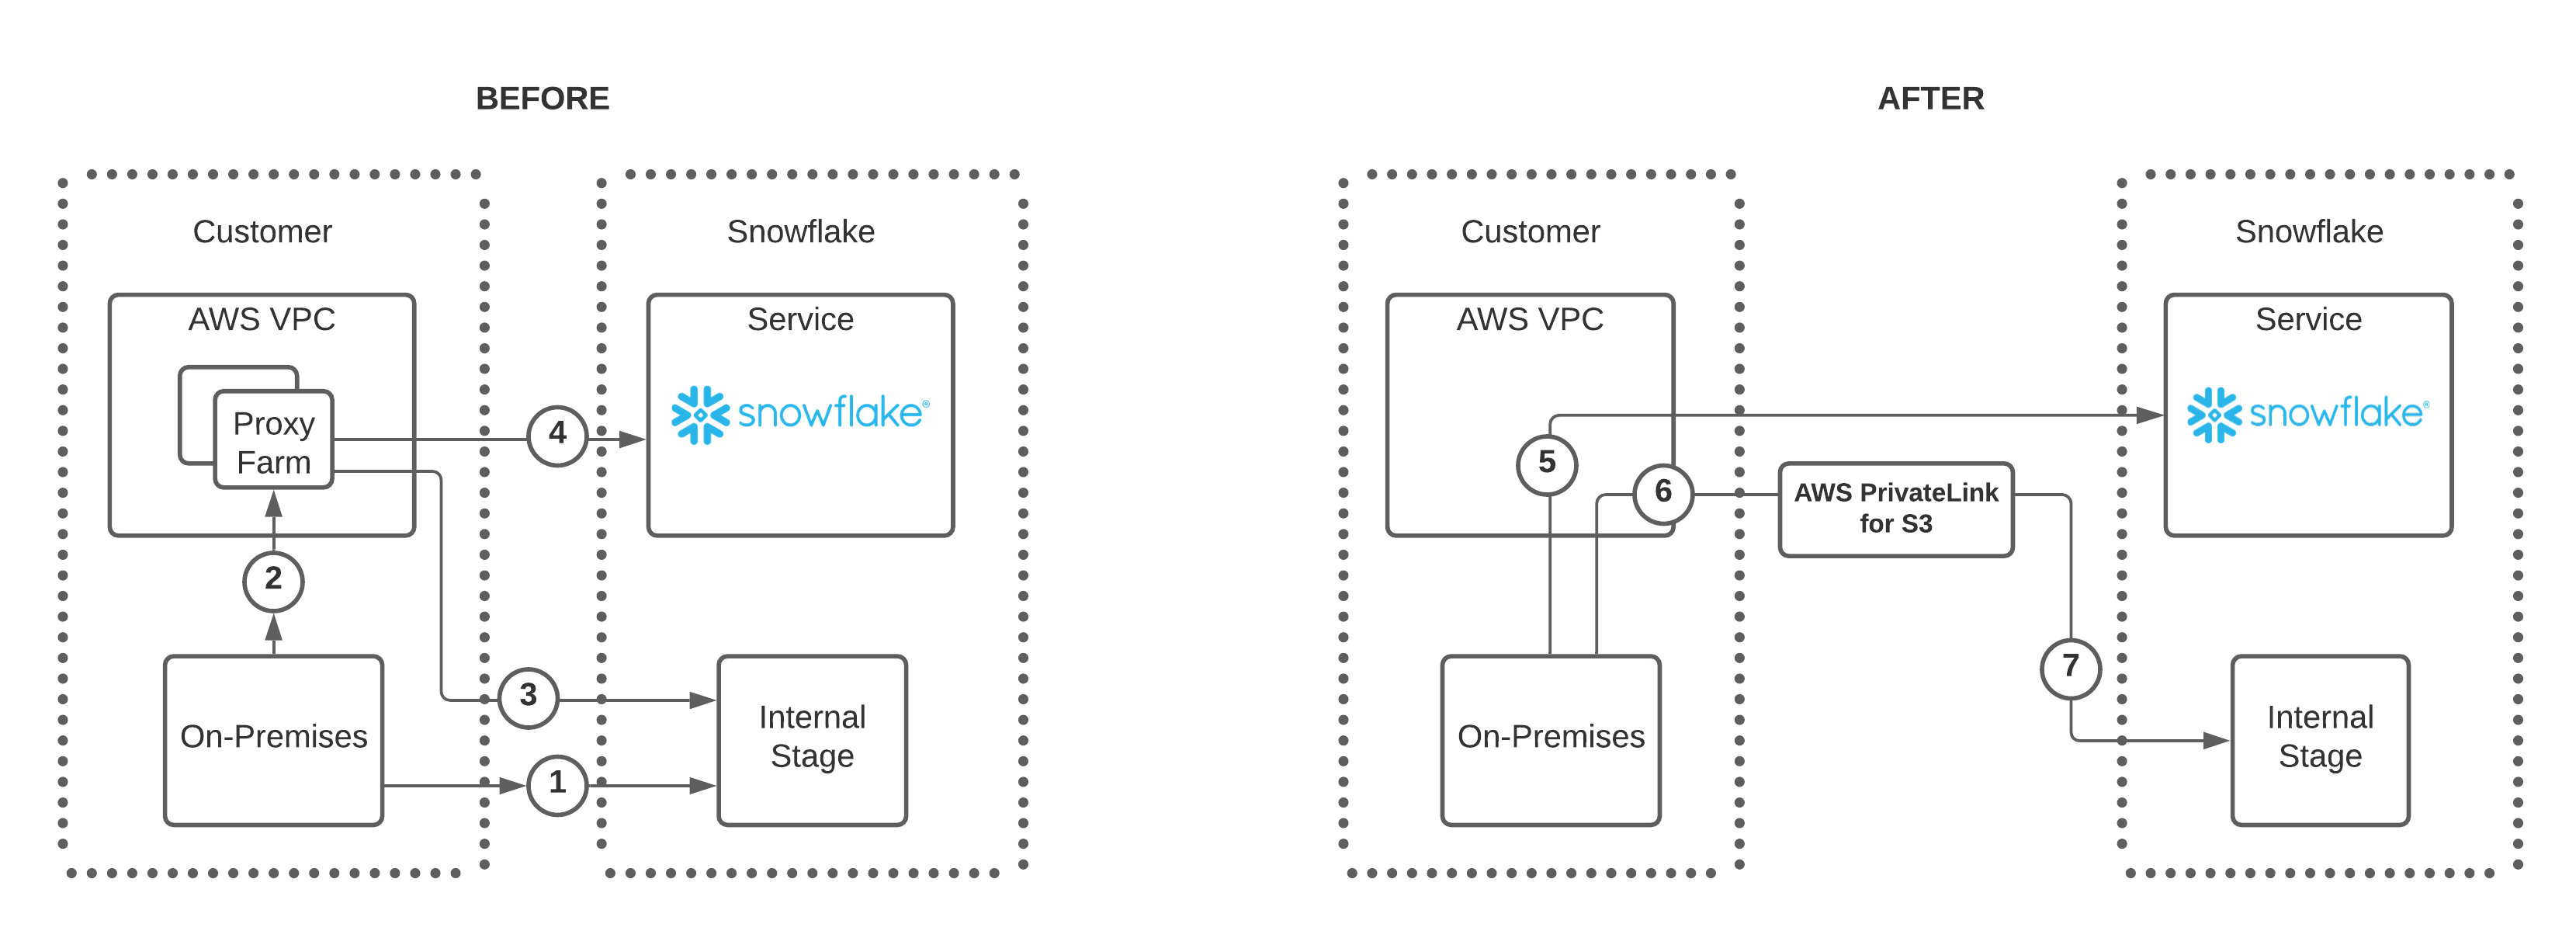 Connect to internal stage using AWS PrivateLink for S3